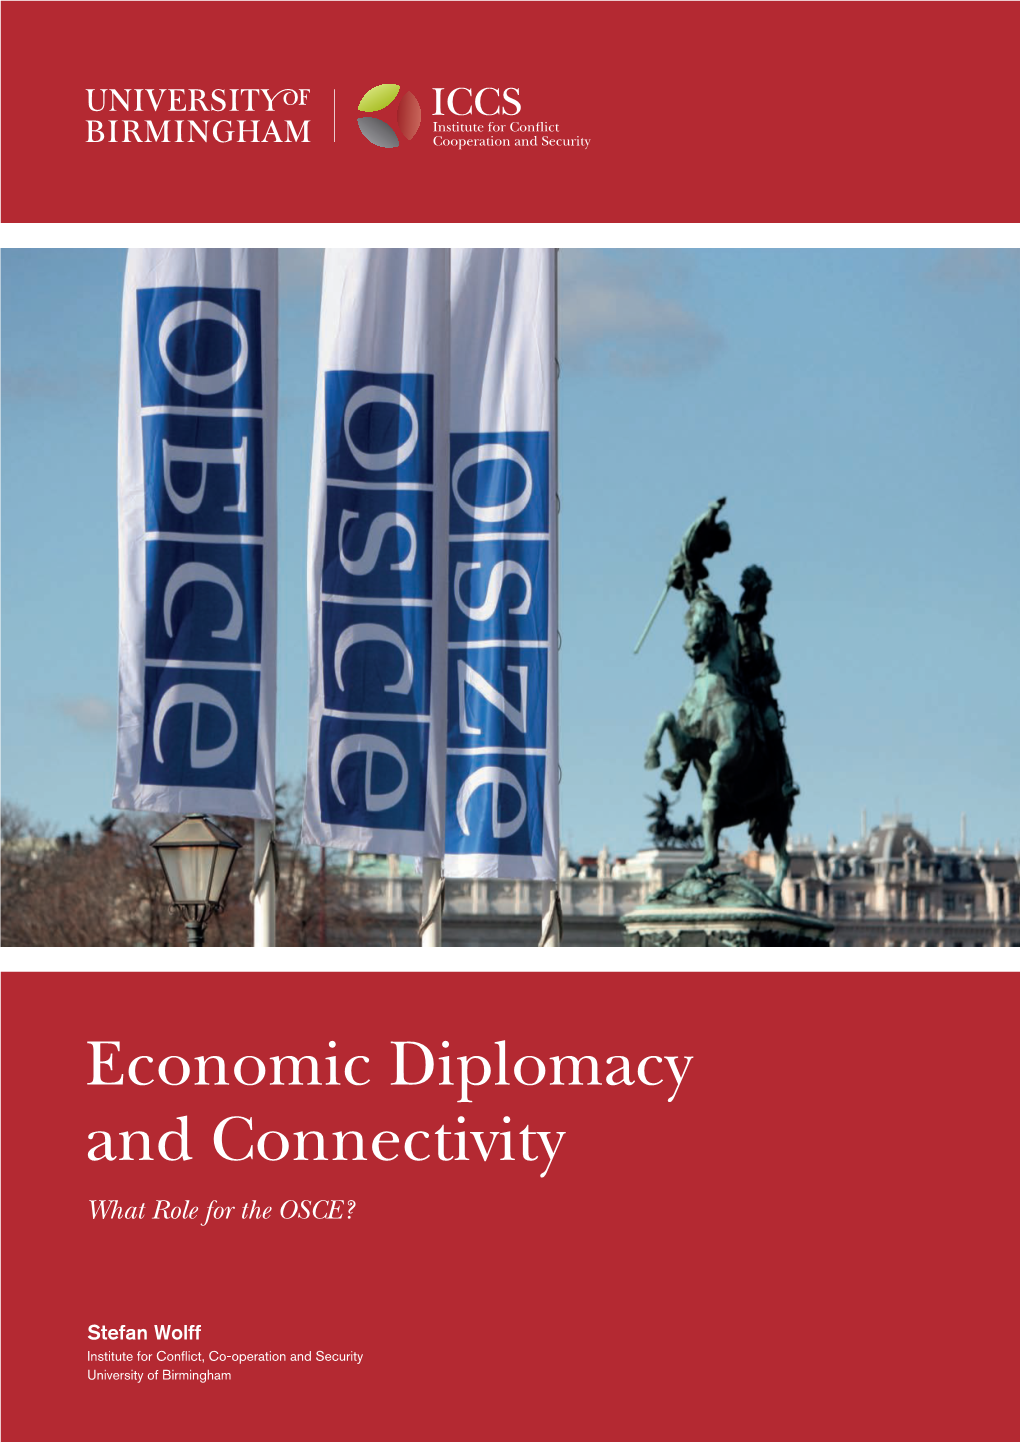 Economic Diplomacy and Connectivity What Role for the OSCE?